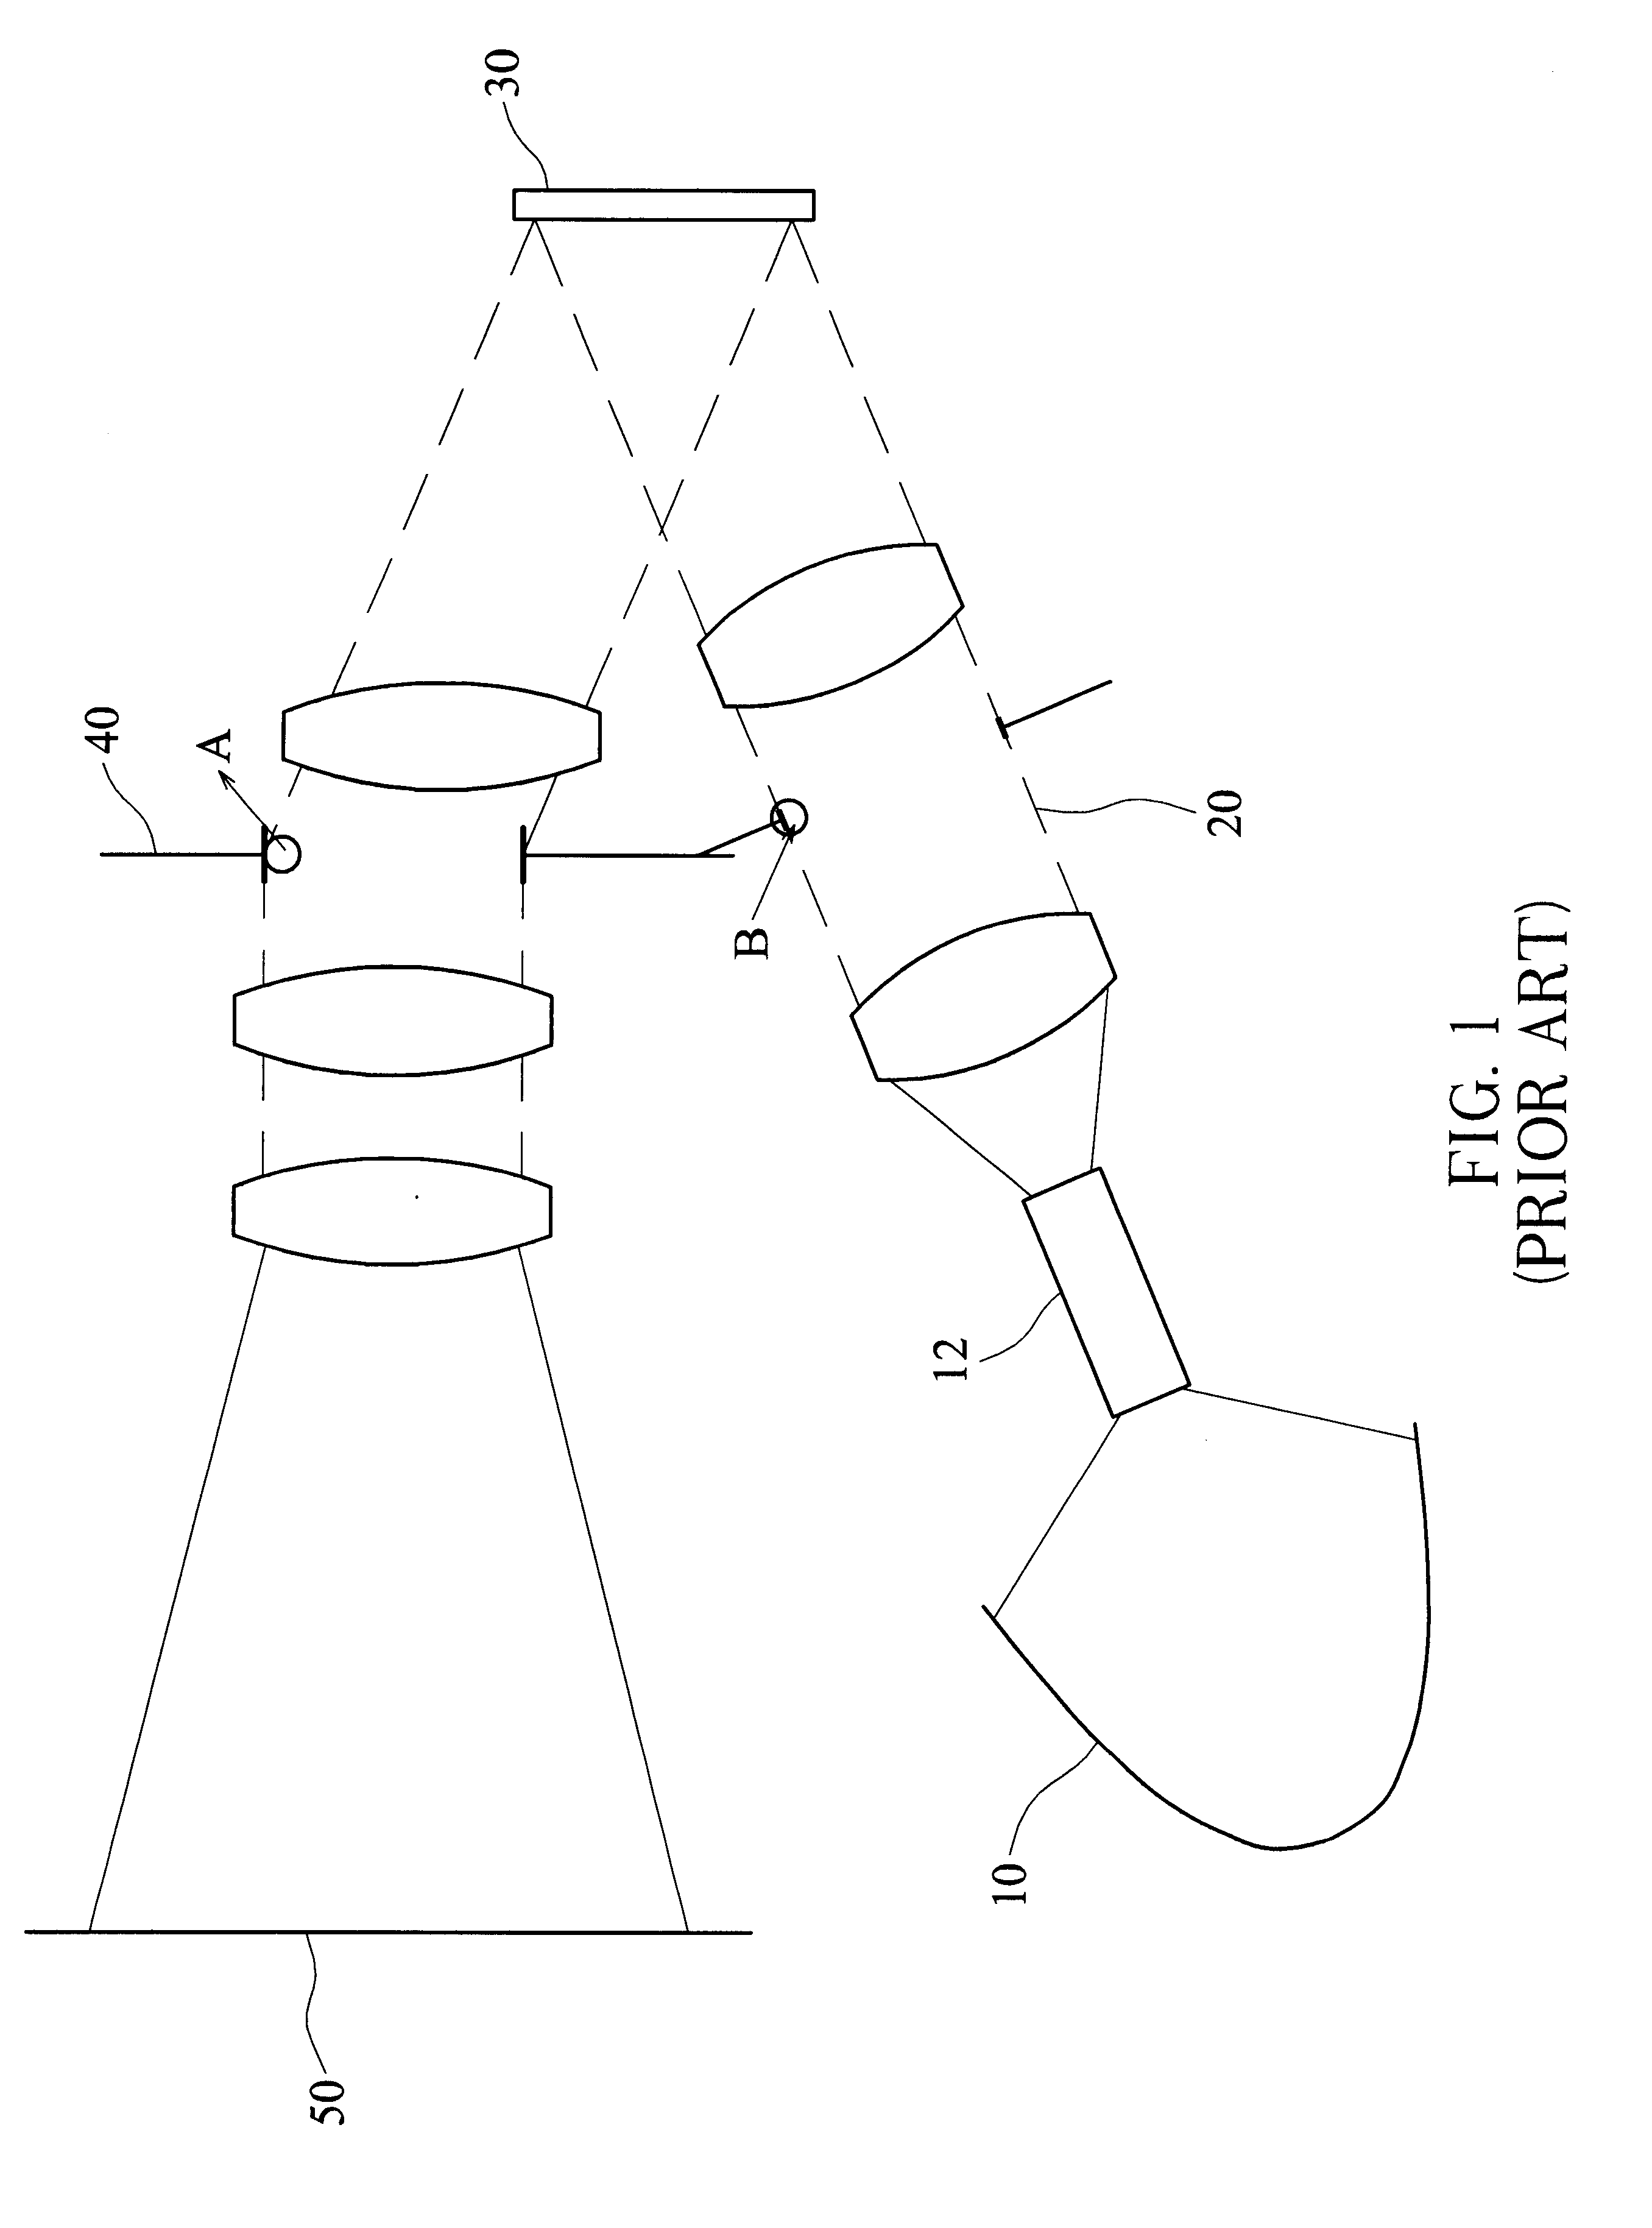 Optical device for eliminating stray light